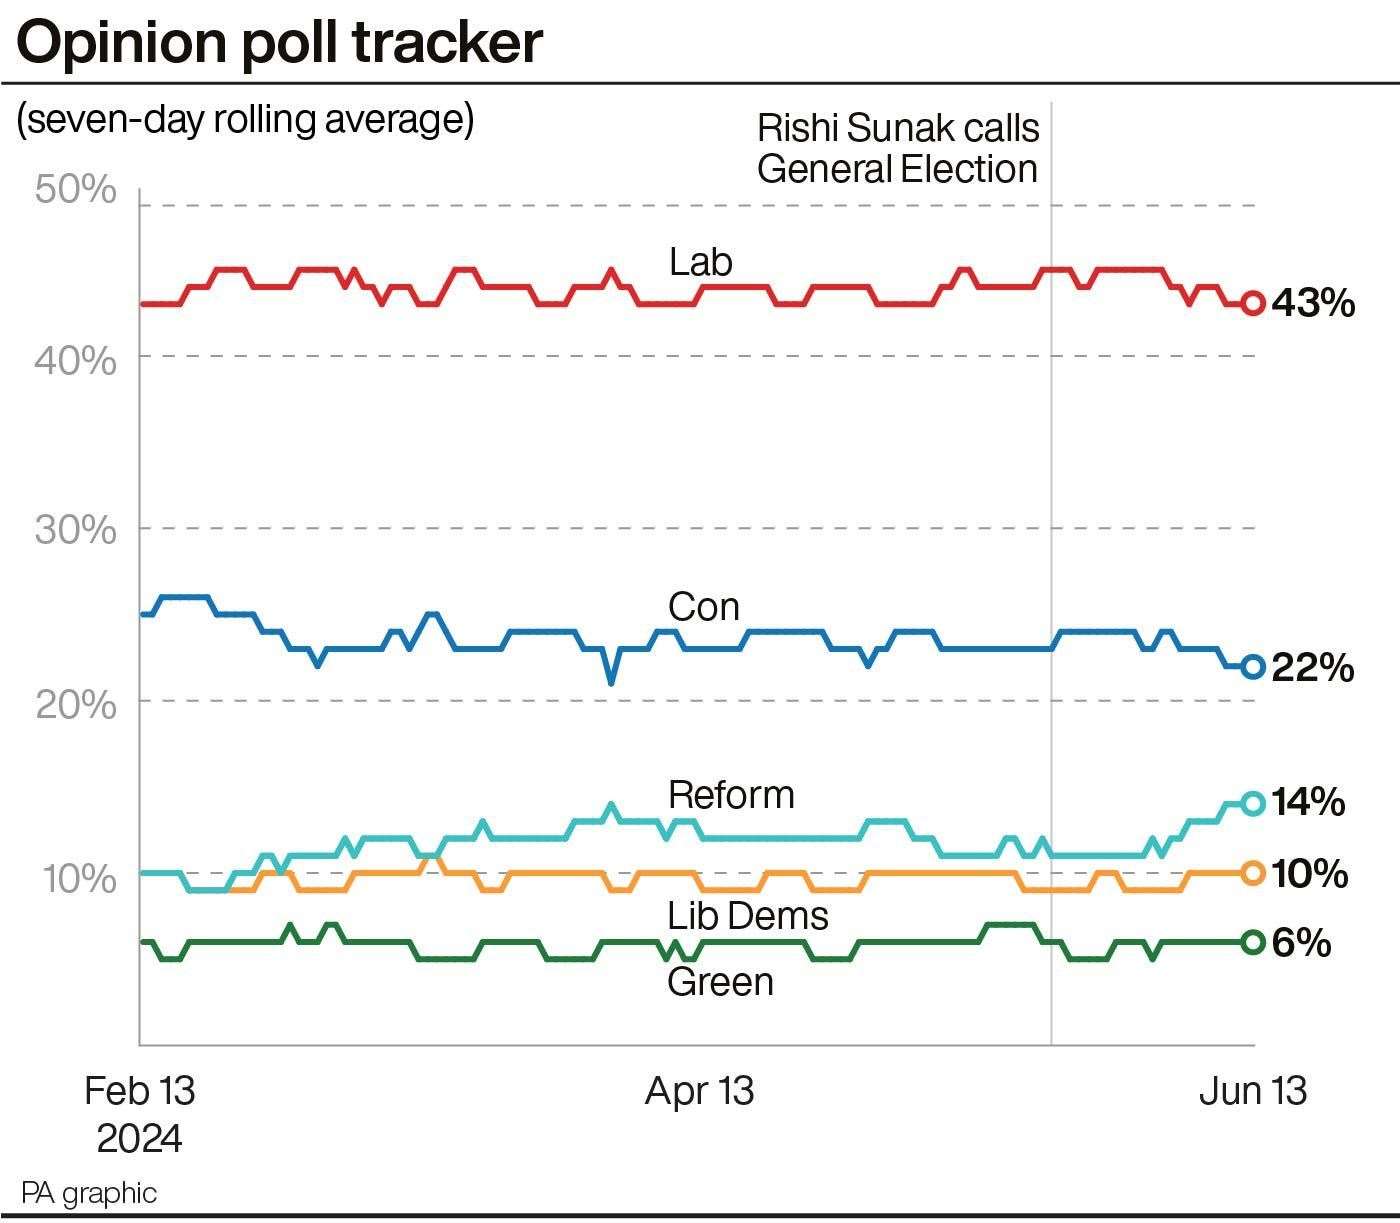 The latest seven-day opinion poll averages for the main political parties (PA Graphics)